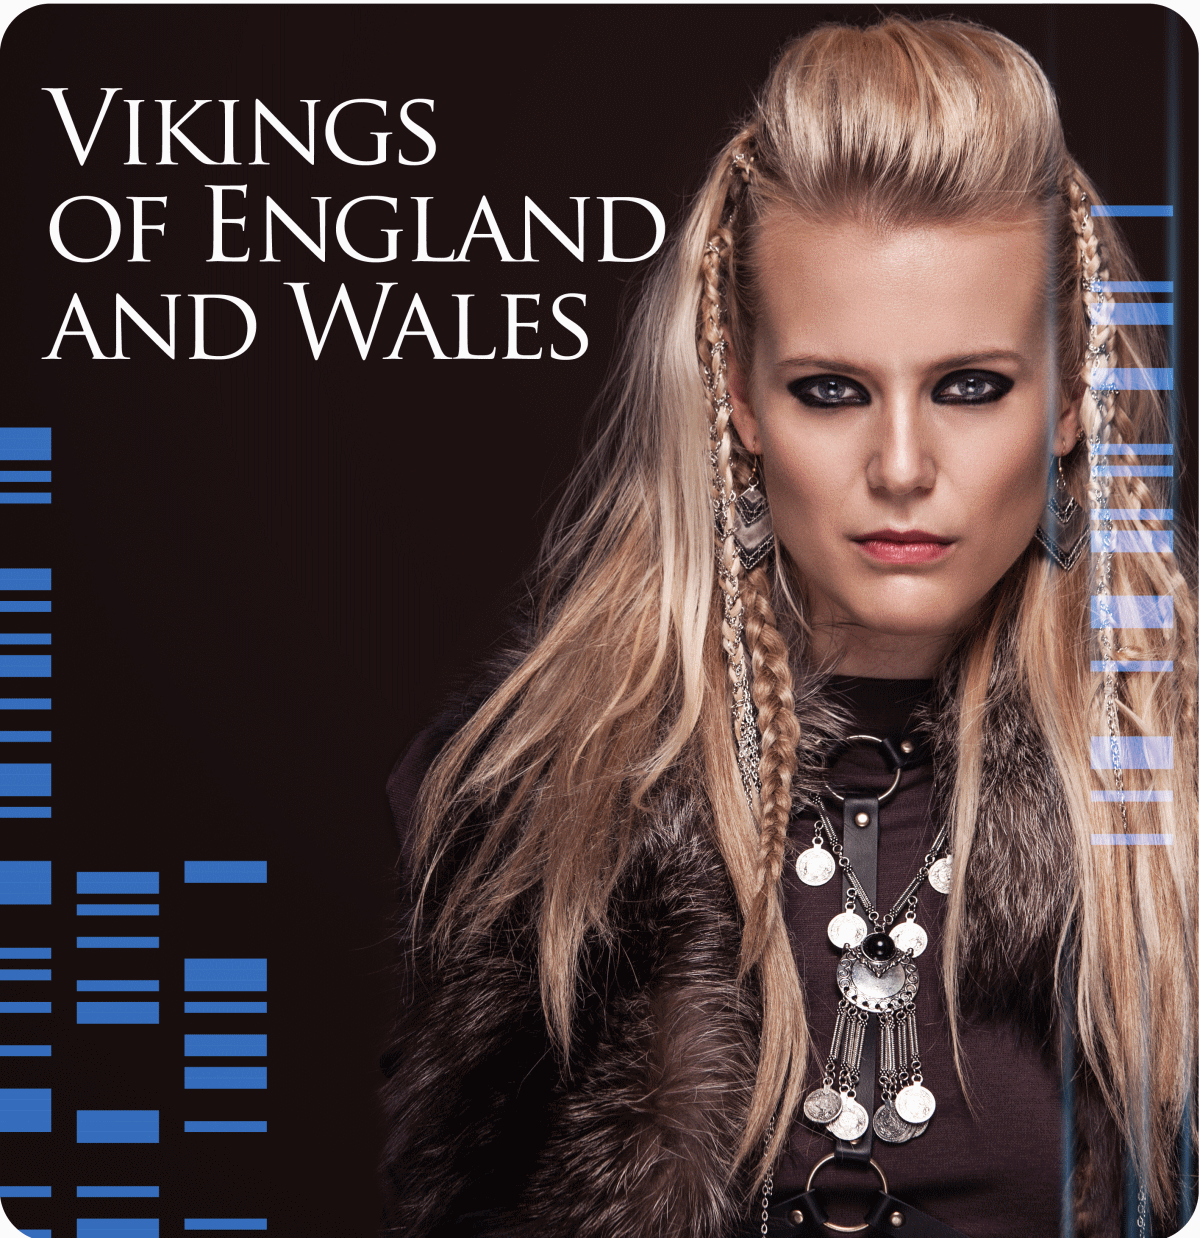 Vikings of England and Wales